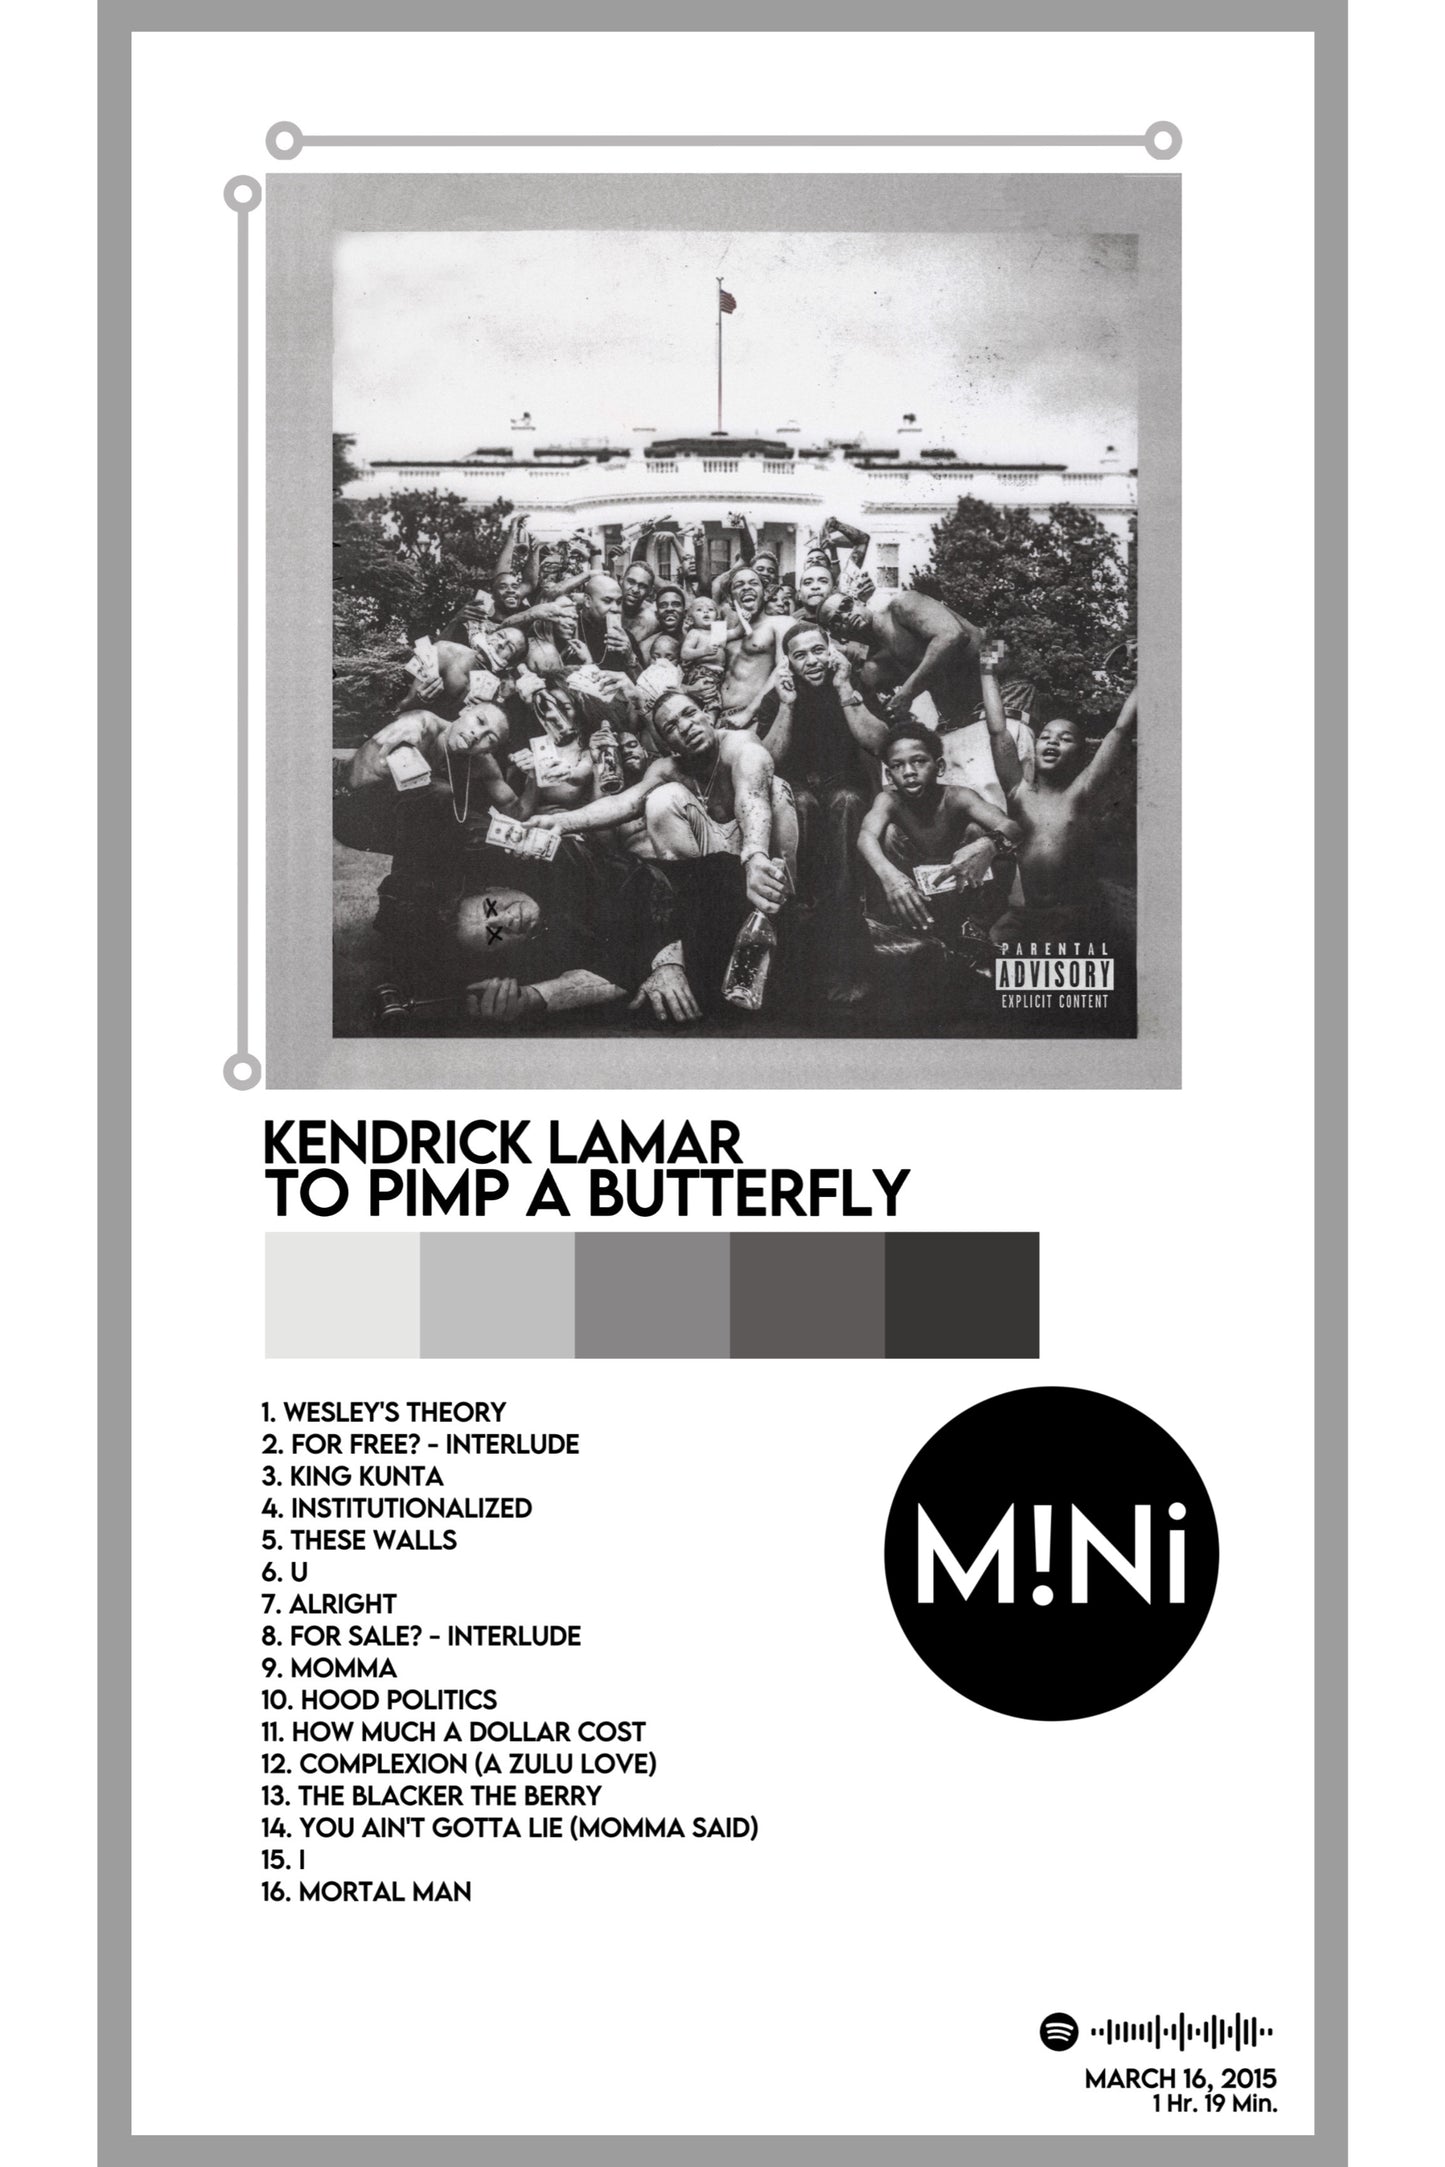 Kendrick Lamar - 'To Pimp A Butterfly' 12x18 Poster